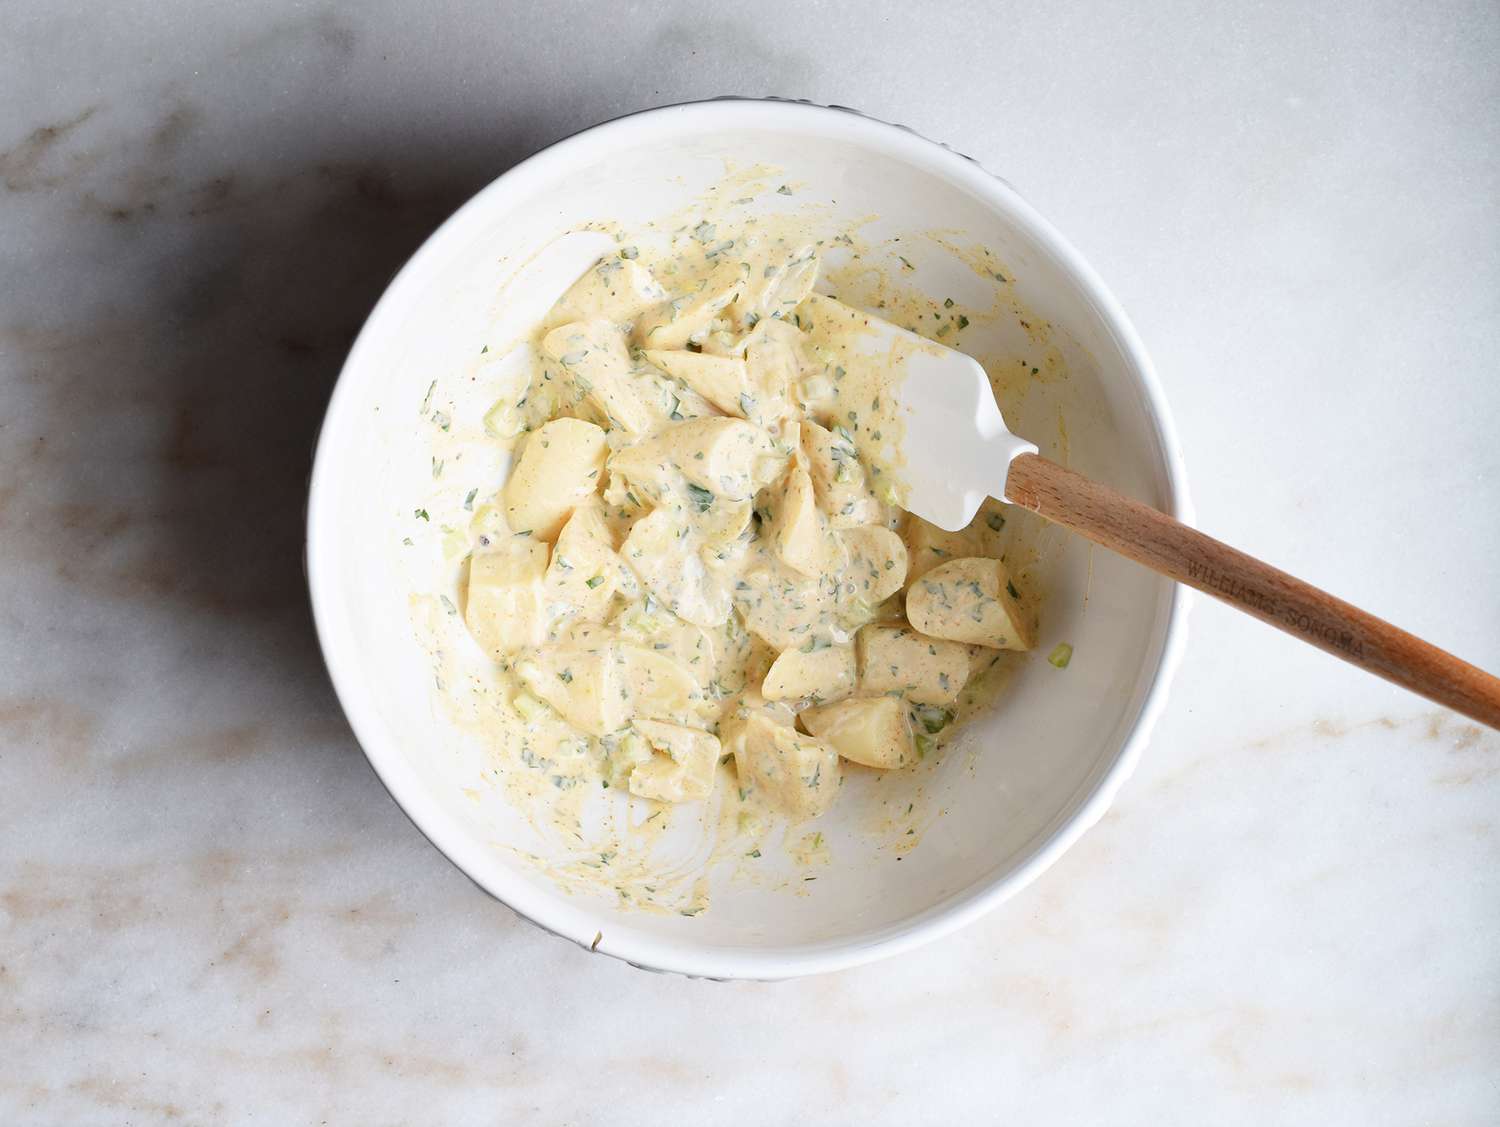 hearts of palm tossed in mayonnaise dressing in a bowl